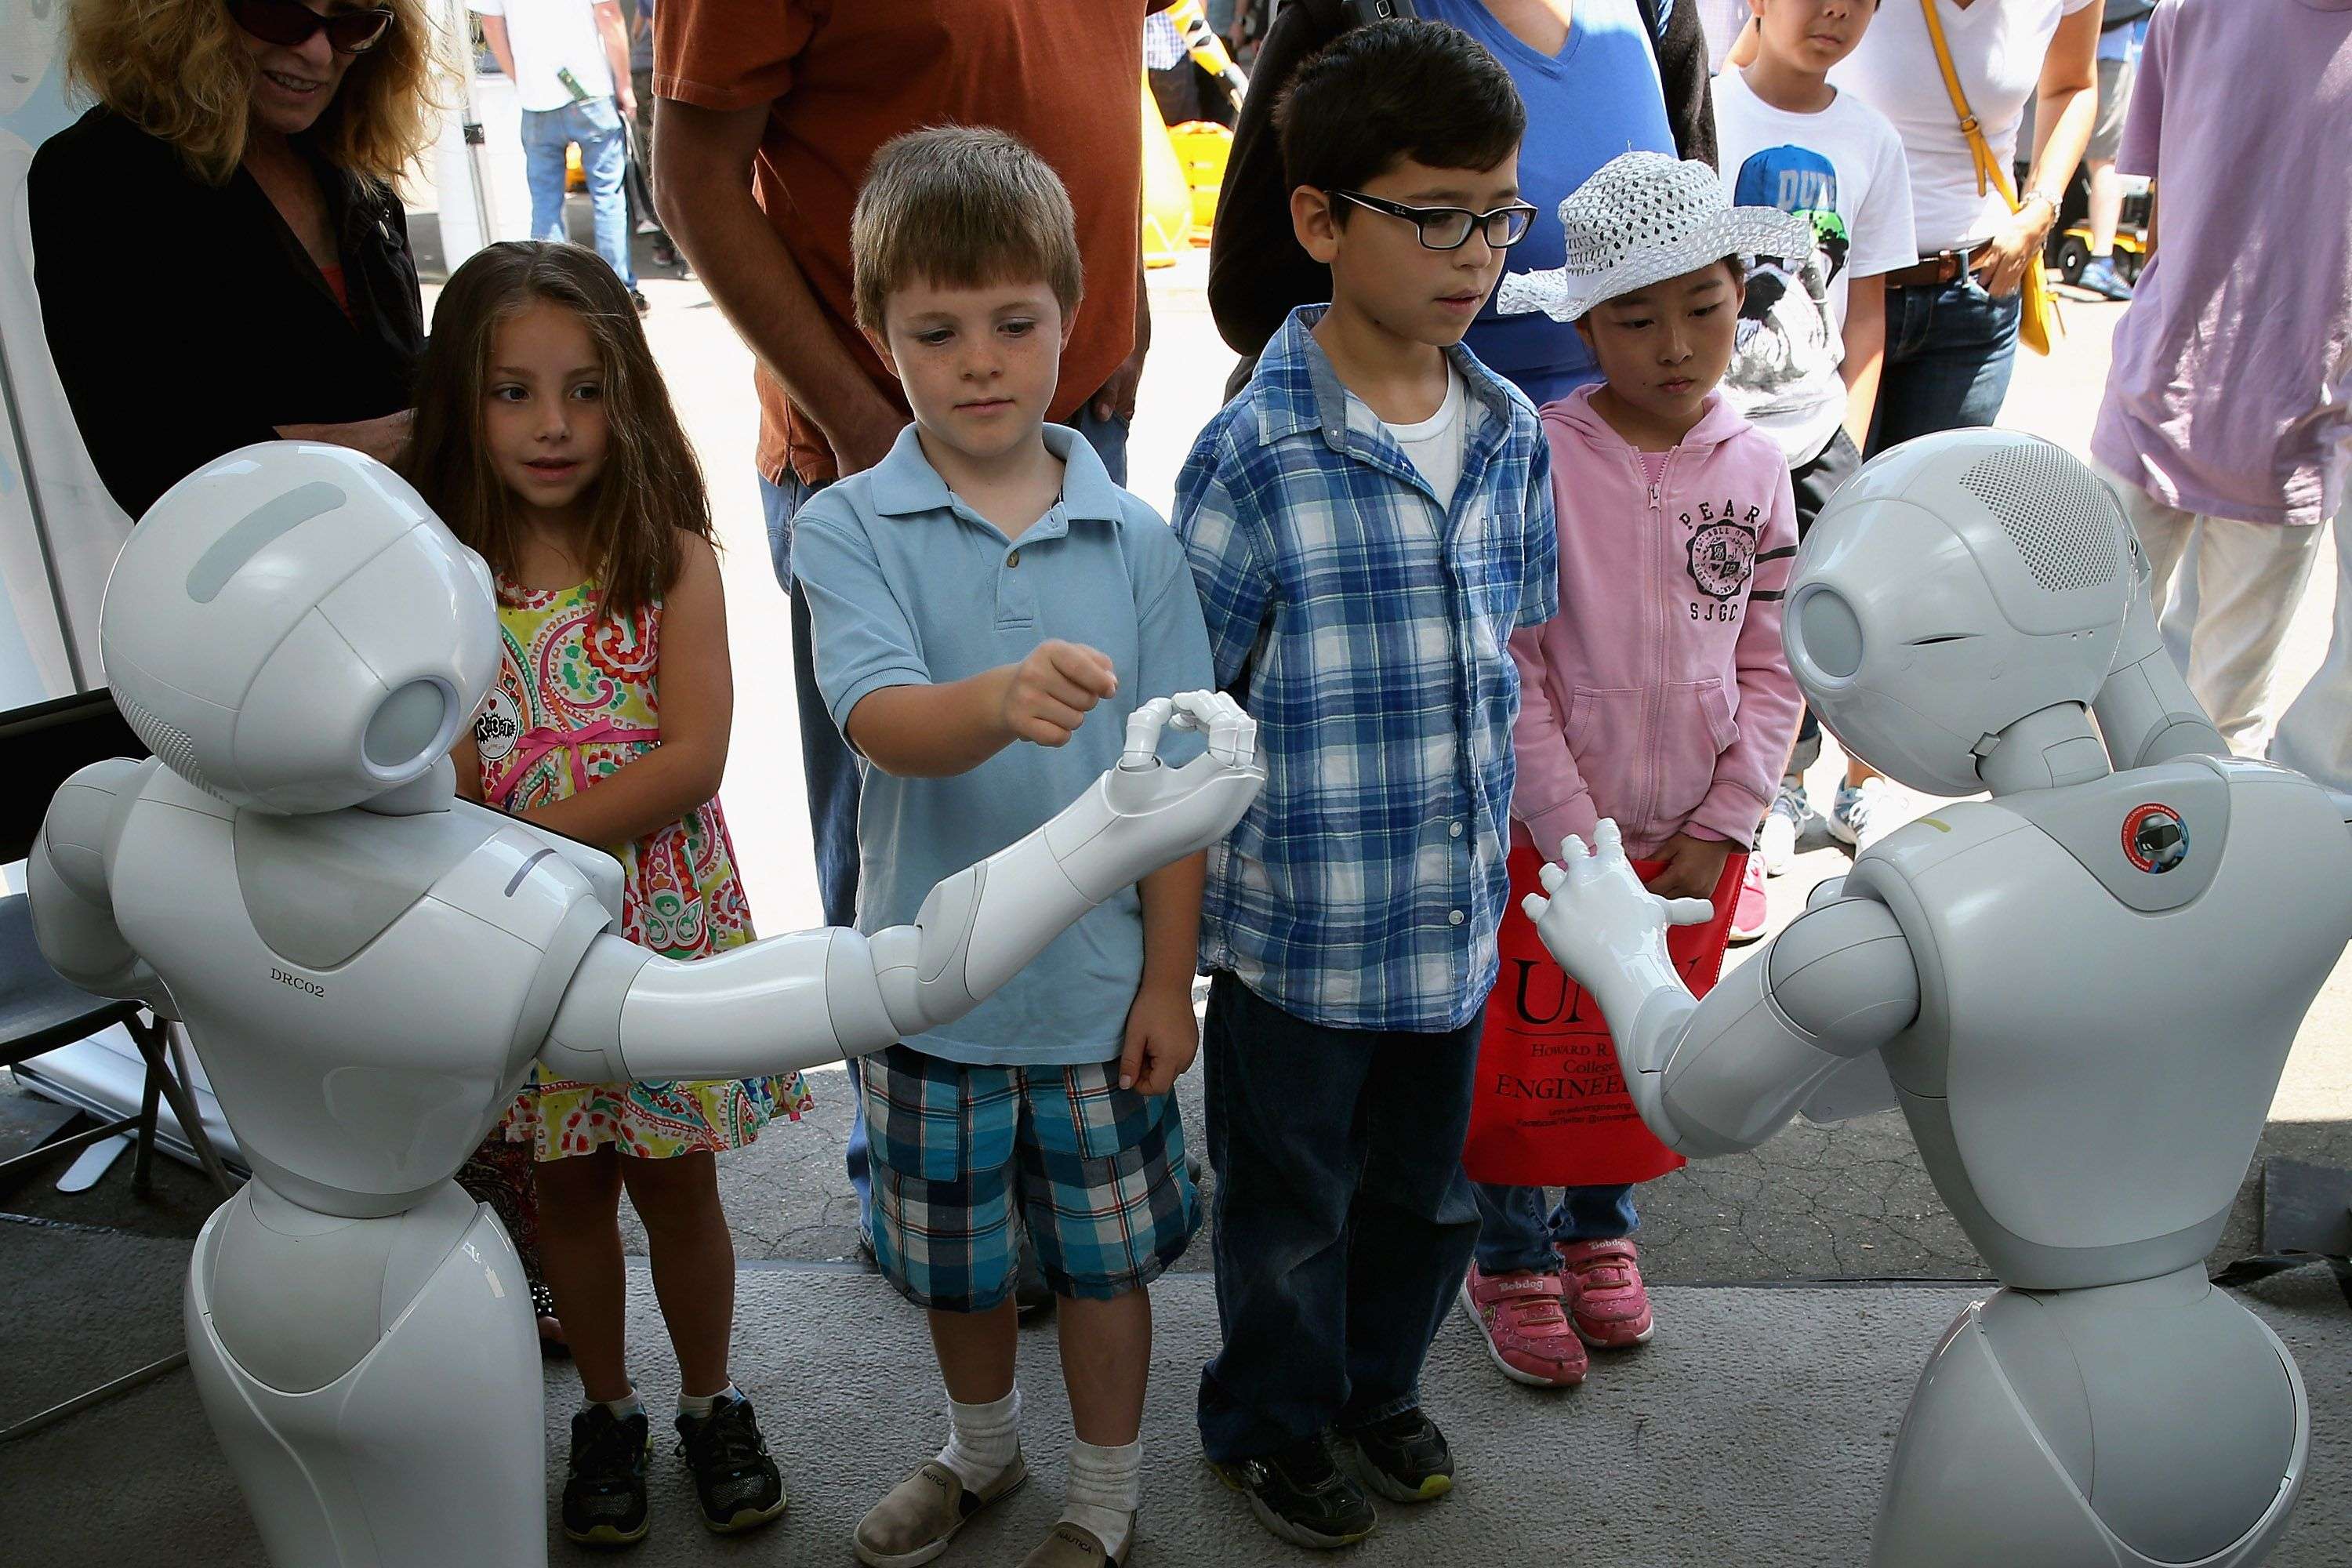 POMONA, CA - JUNE 06: Children interact with Aldebaran's Pepper robot during the Defense Advanced Research Projects Agency (DARPA) Robotics Challenge Expo at the Fairplex June 6, 2015 in Pomona, California. Organized by DARPA, the Pentagon's science research group, 24 teams from aorund the world are competing for $3.5 million in prize money that will be awarded to the robots that best respond to natural and man-made disasters. Chip Somodevilla/Getty Images/AFP == FOR NEWSPAPERS, INTERNET, TELCOS & TELEVISION USE ONLY ==